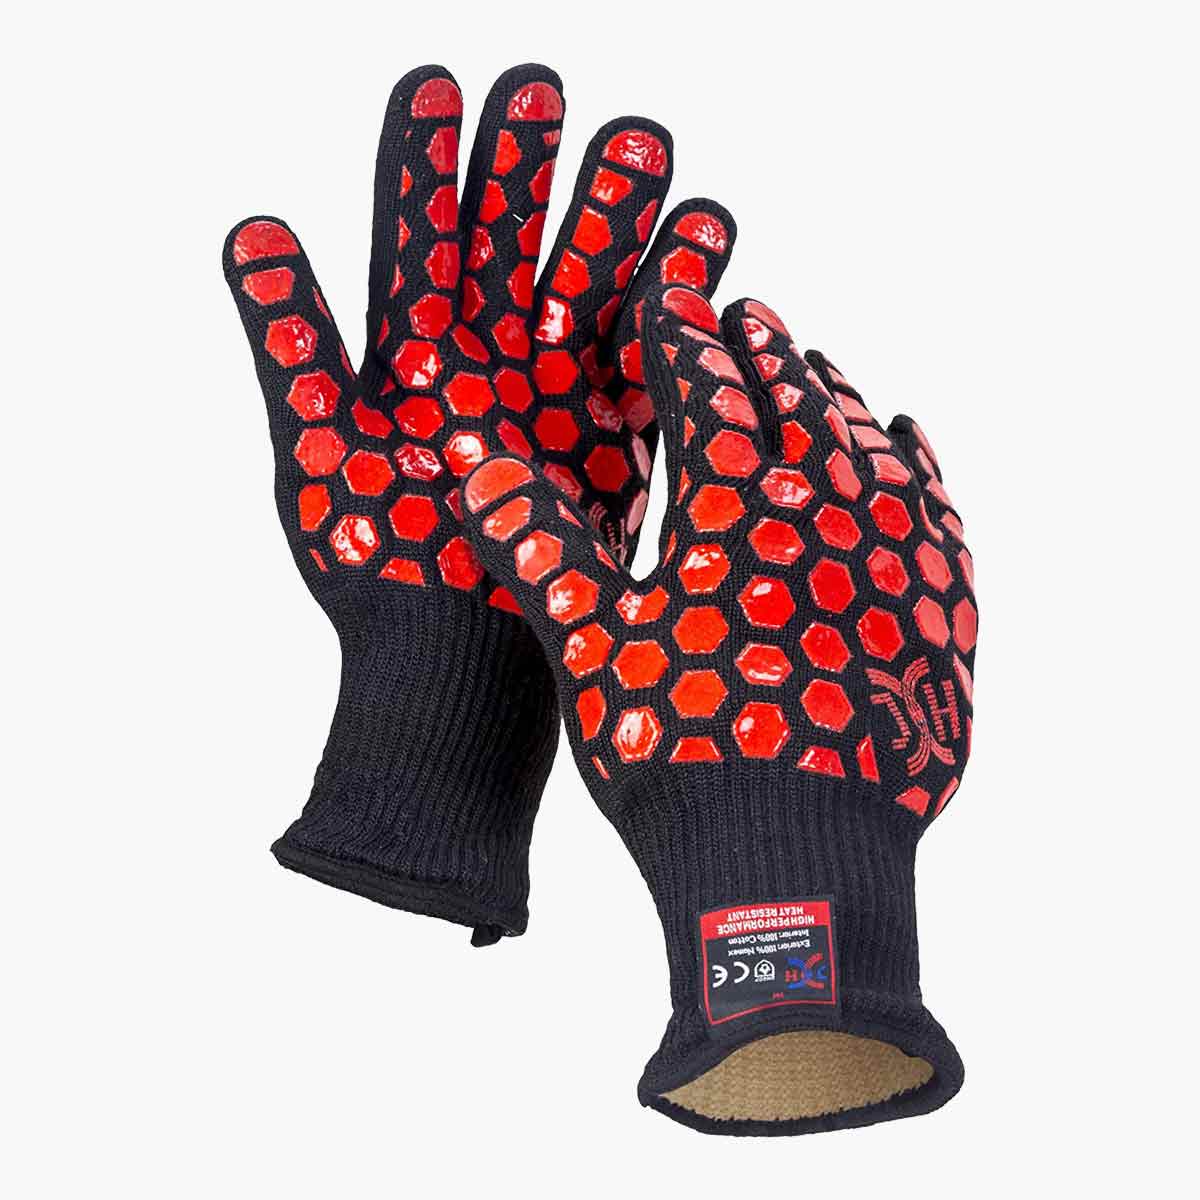 A pair of red and black JHSafety oven gloves.